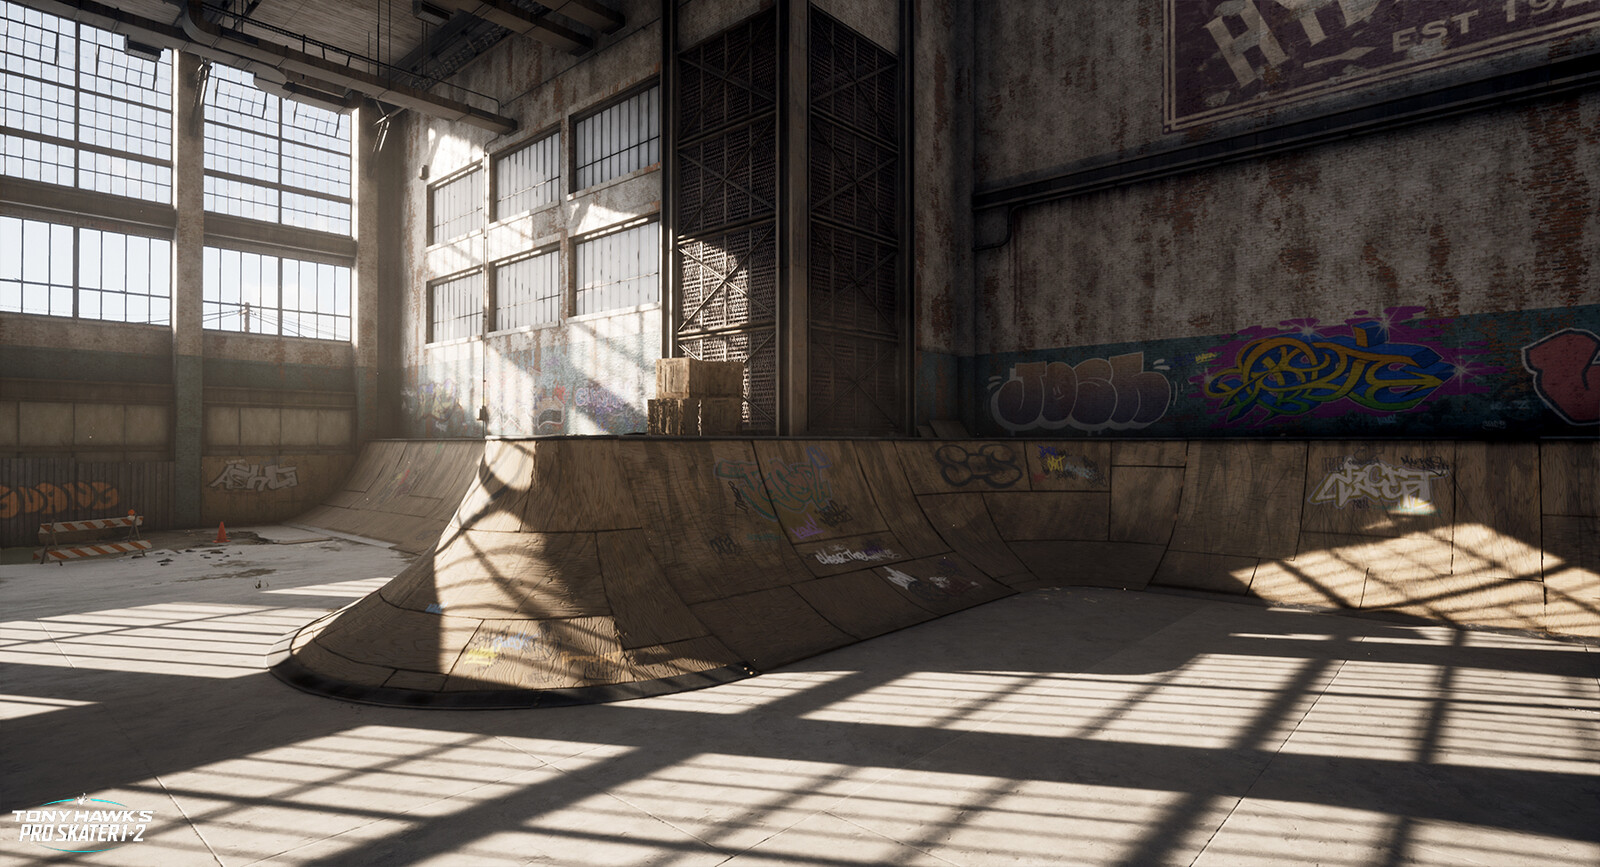 Other section of the long halfpipe in Warehouse, as well as more of the placed Graffiti.